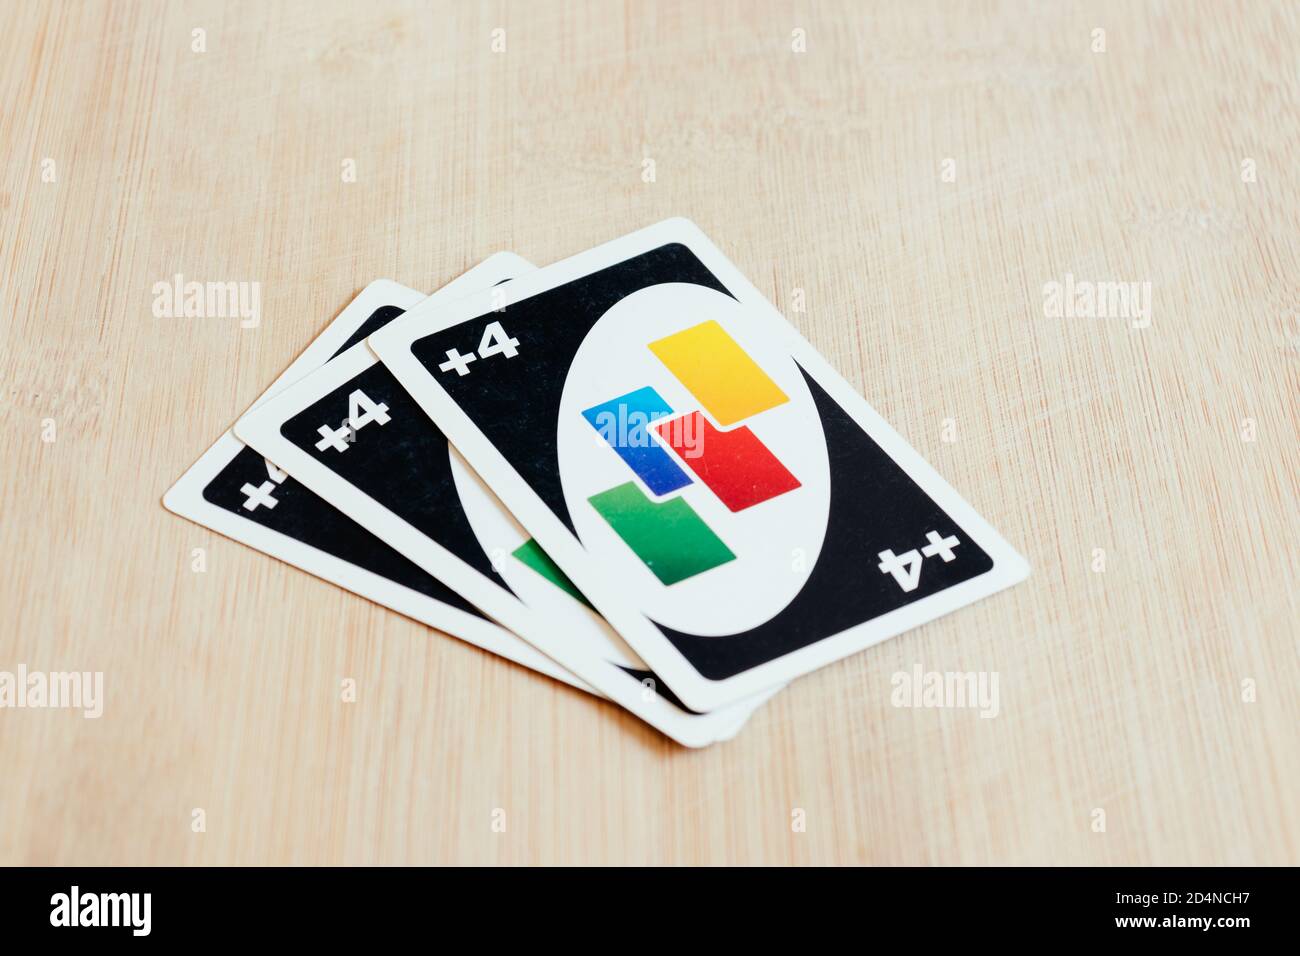 455 Uno Card Stock Photos - Free & Royalty-Free Stock Photos from Dreamstime